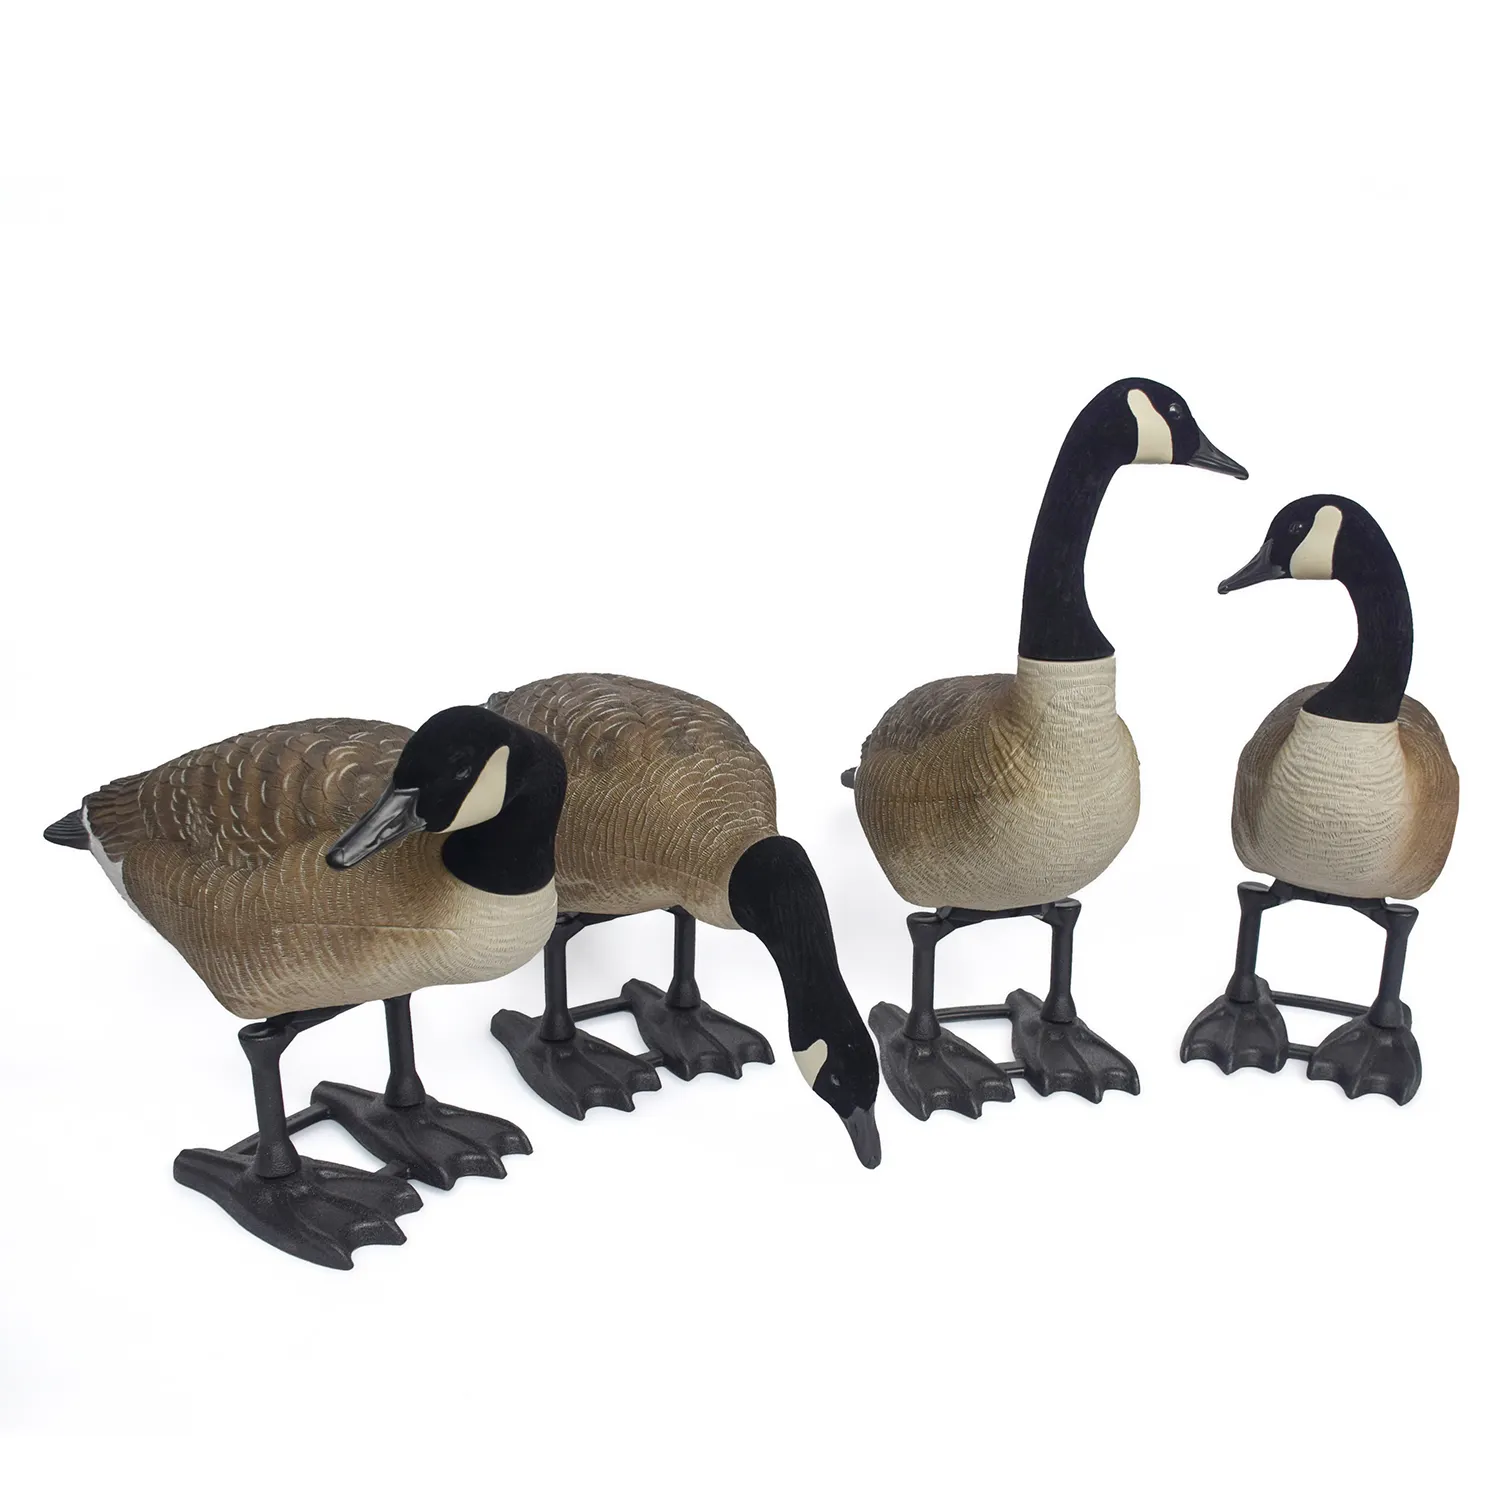 Hot Selling Diversity Realism Light Weight EVA Outdoors Full-Body Goose Decoys with 6 Pack Variety Head